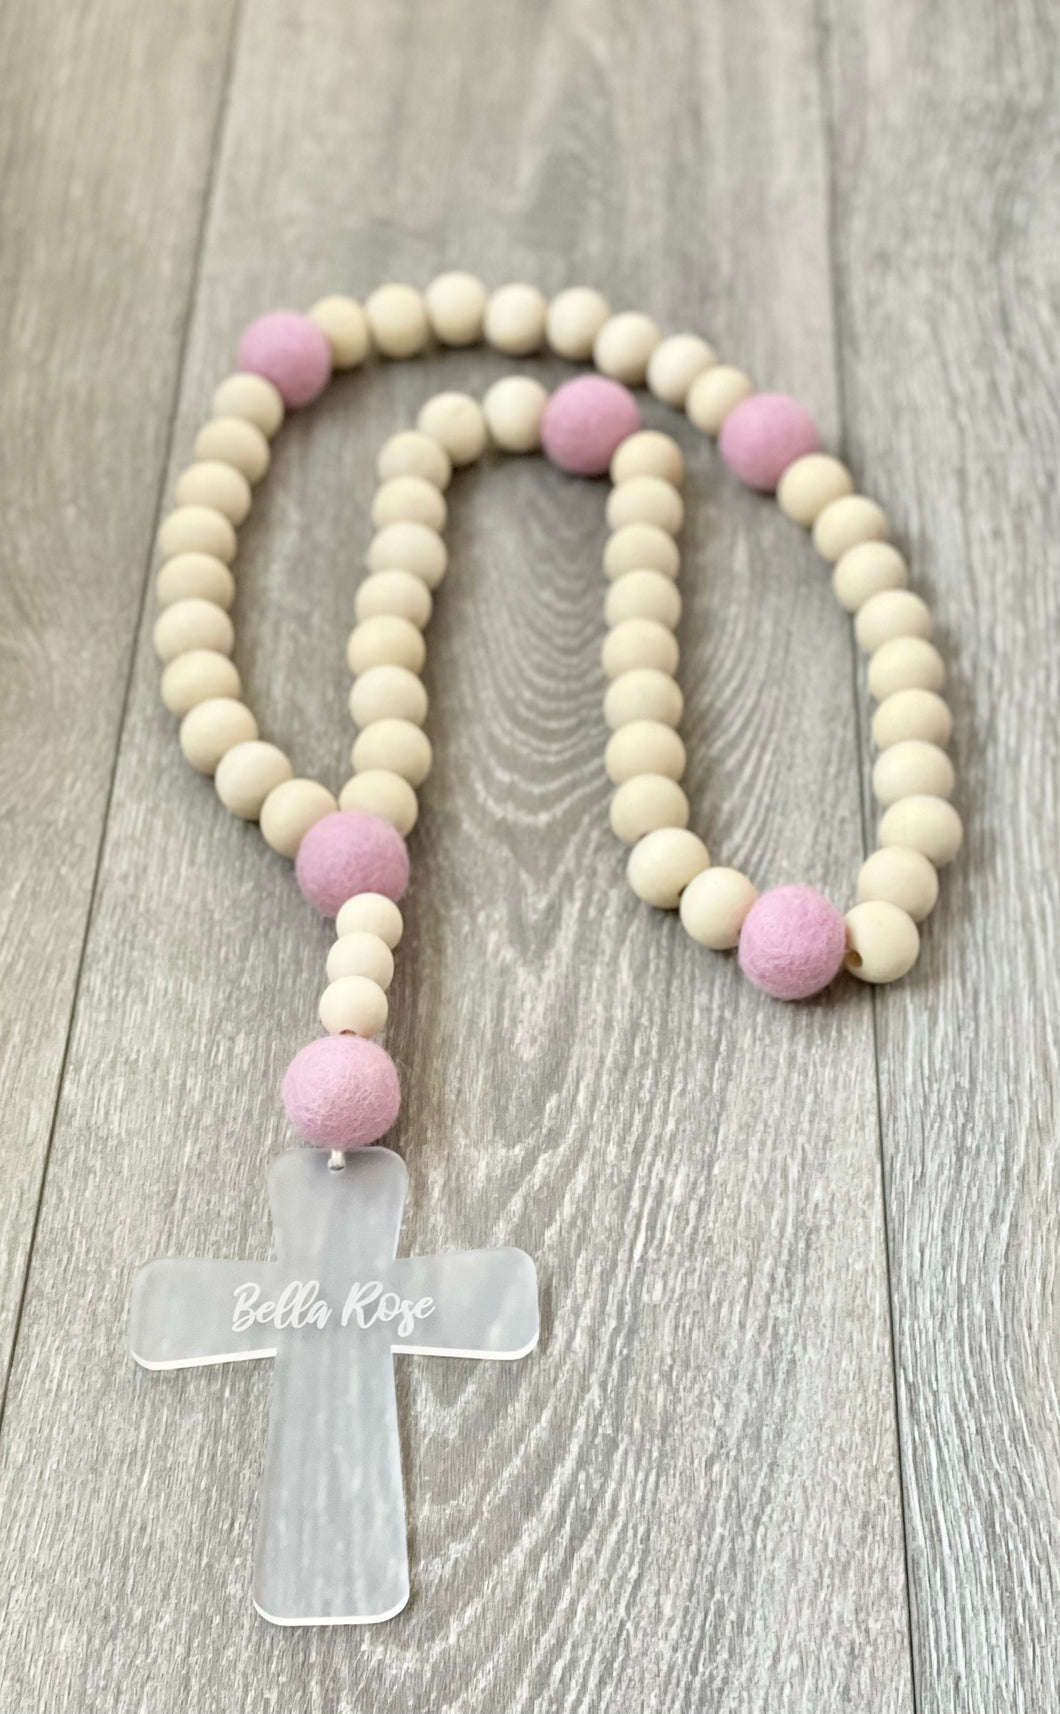 Frosted acrylic cross + handcrafted Pom Pom rosary